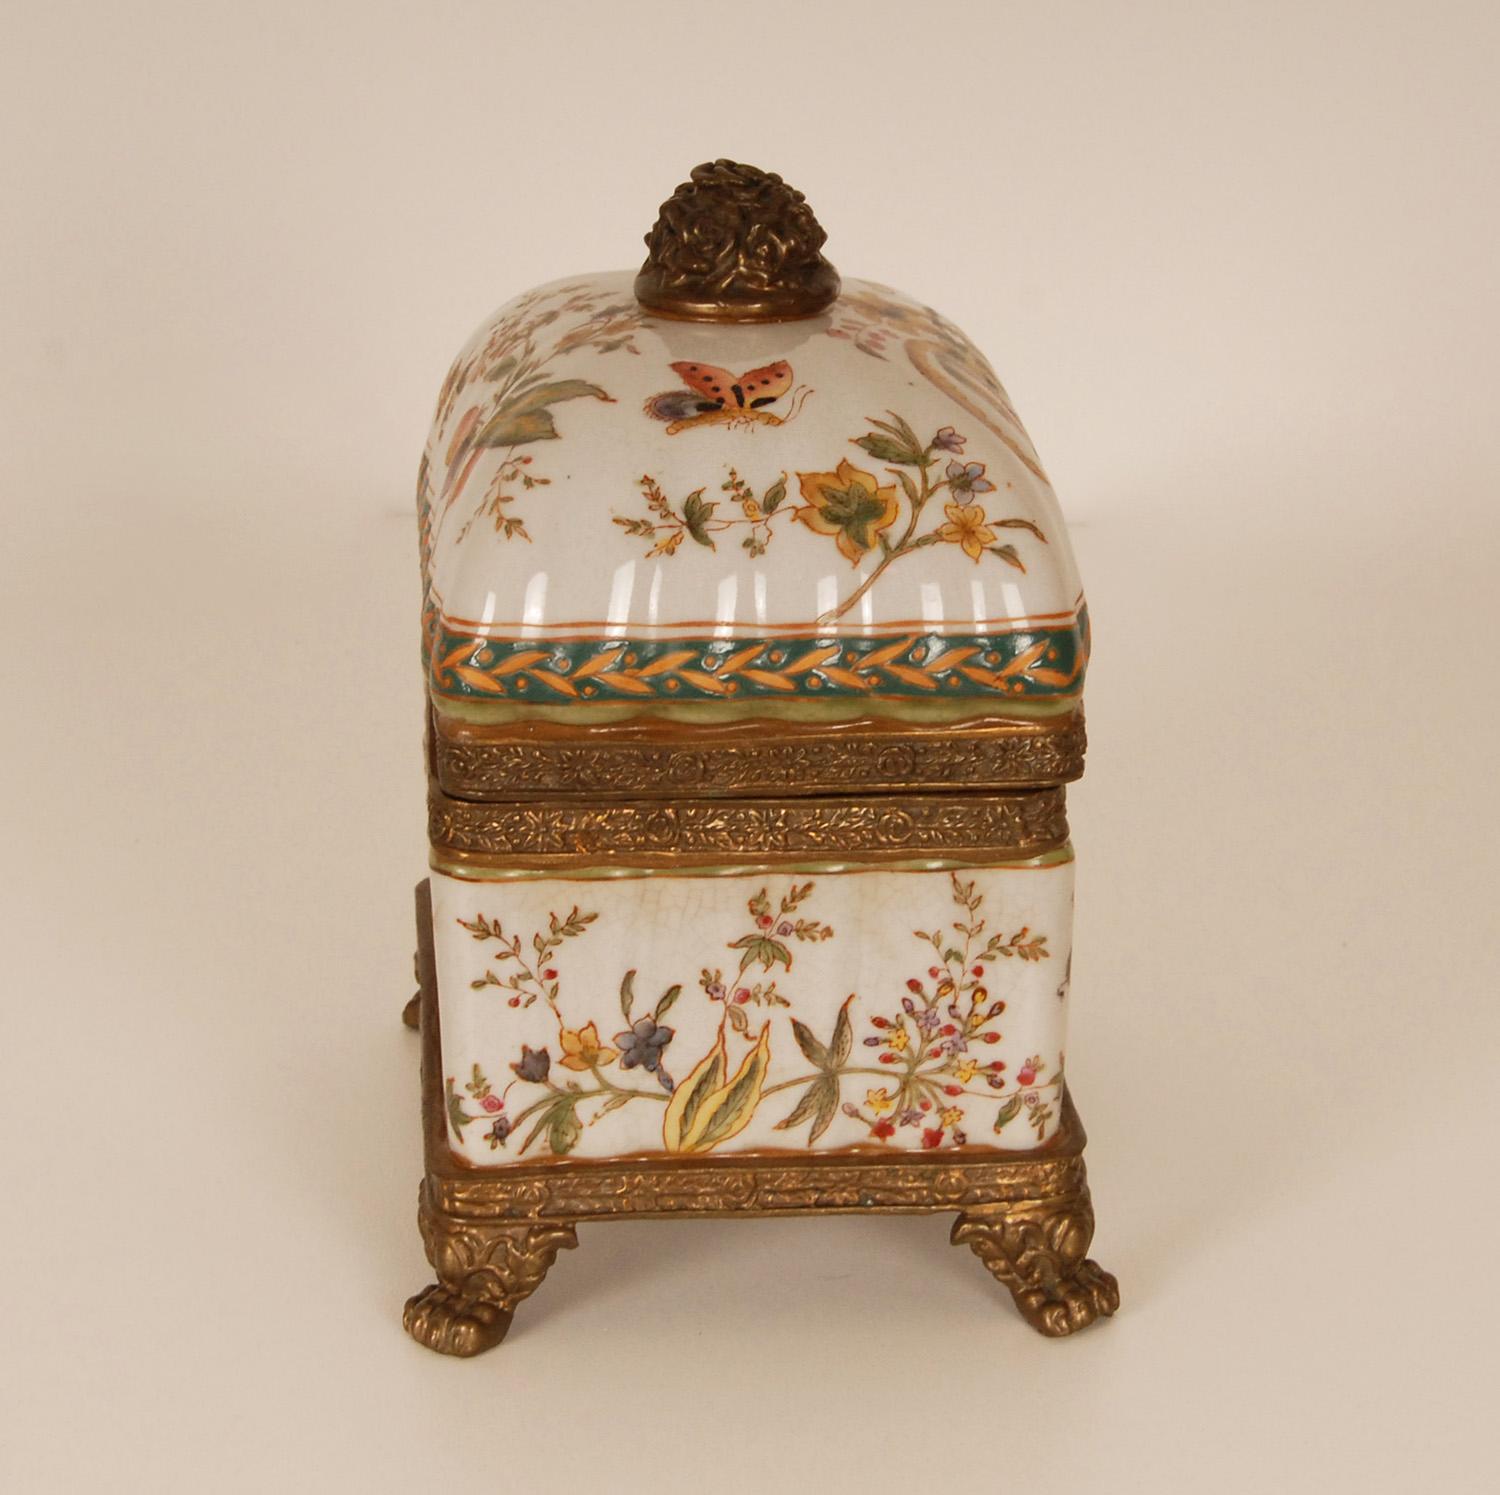 Vintage bronze mounted porcelain box hand painted butterflies and floral decor In Good Condition For Sale In Wommelgem, VAN